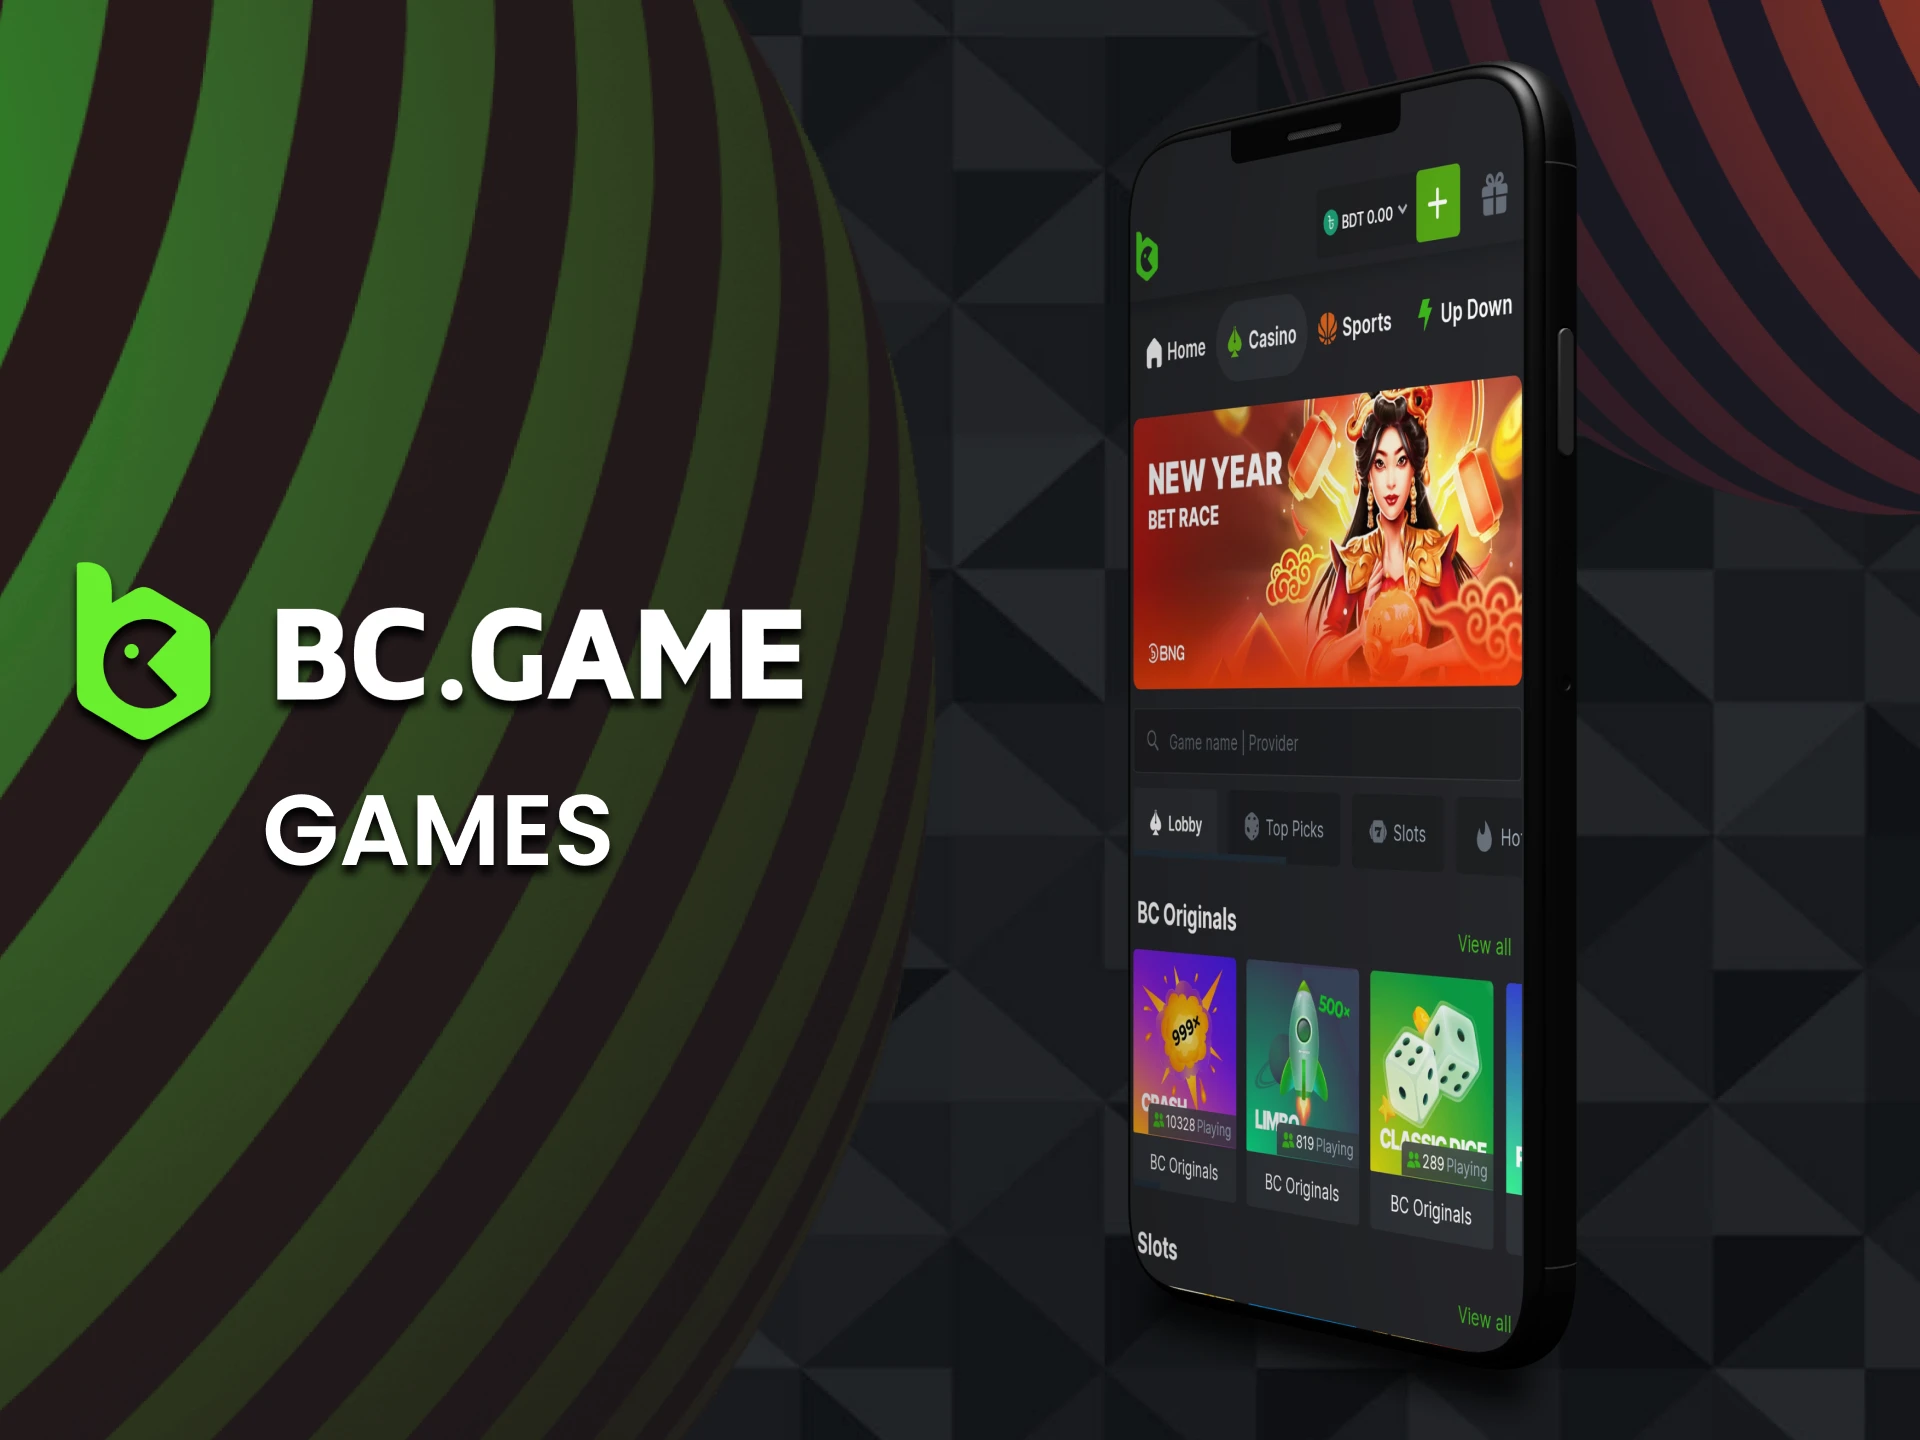 Bet on casino games in the BC Game app for Android and iOS.